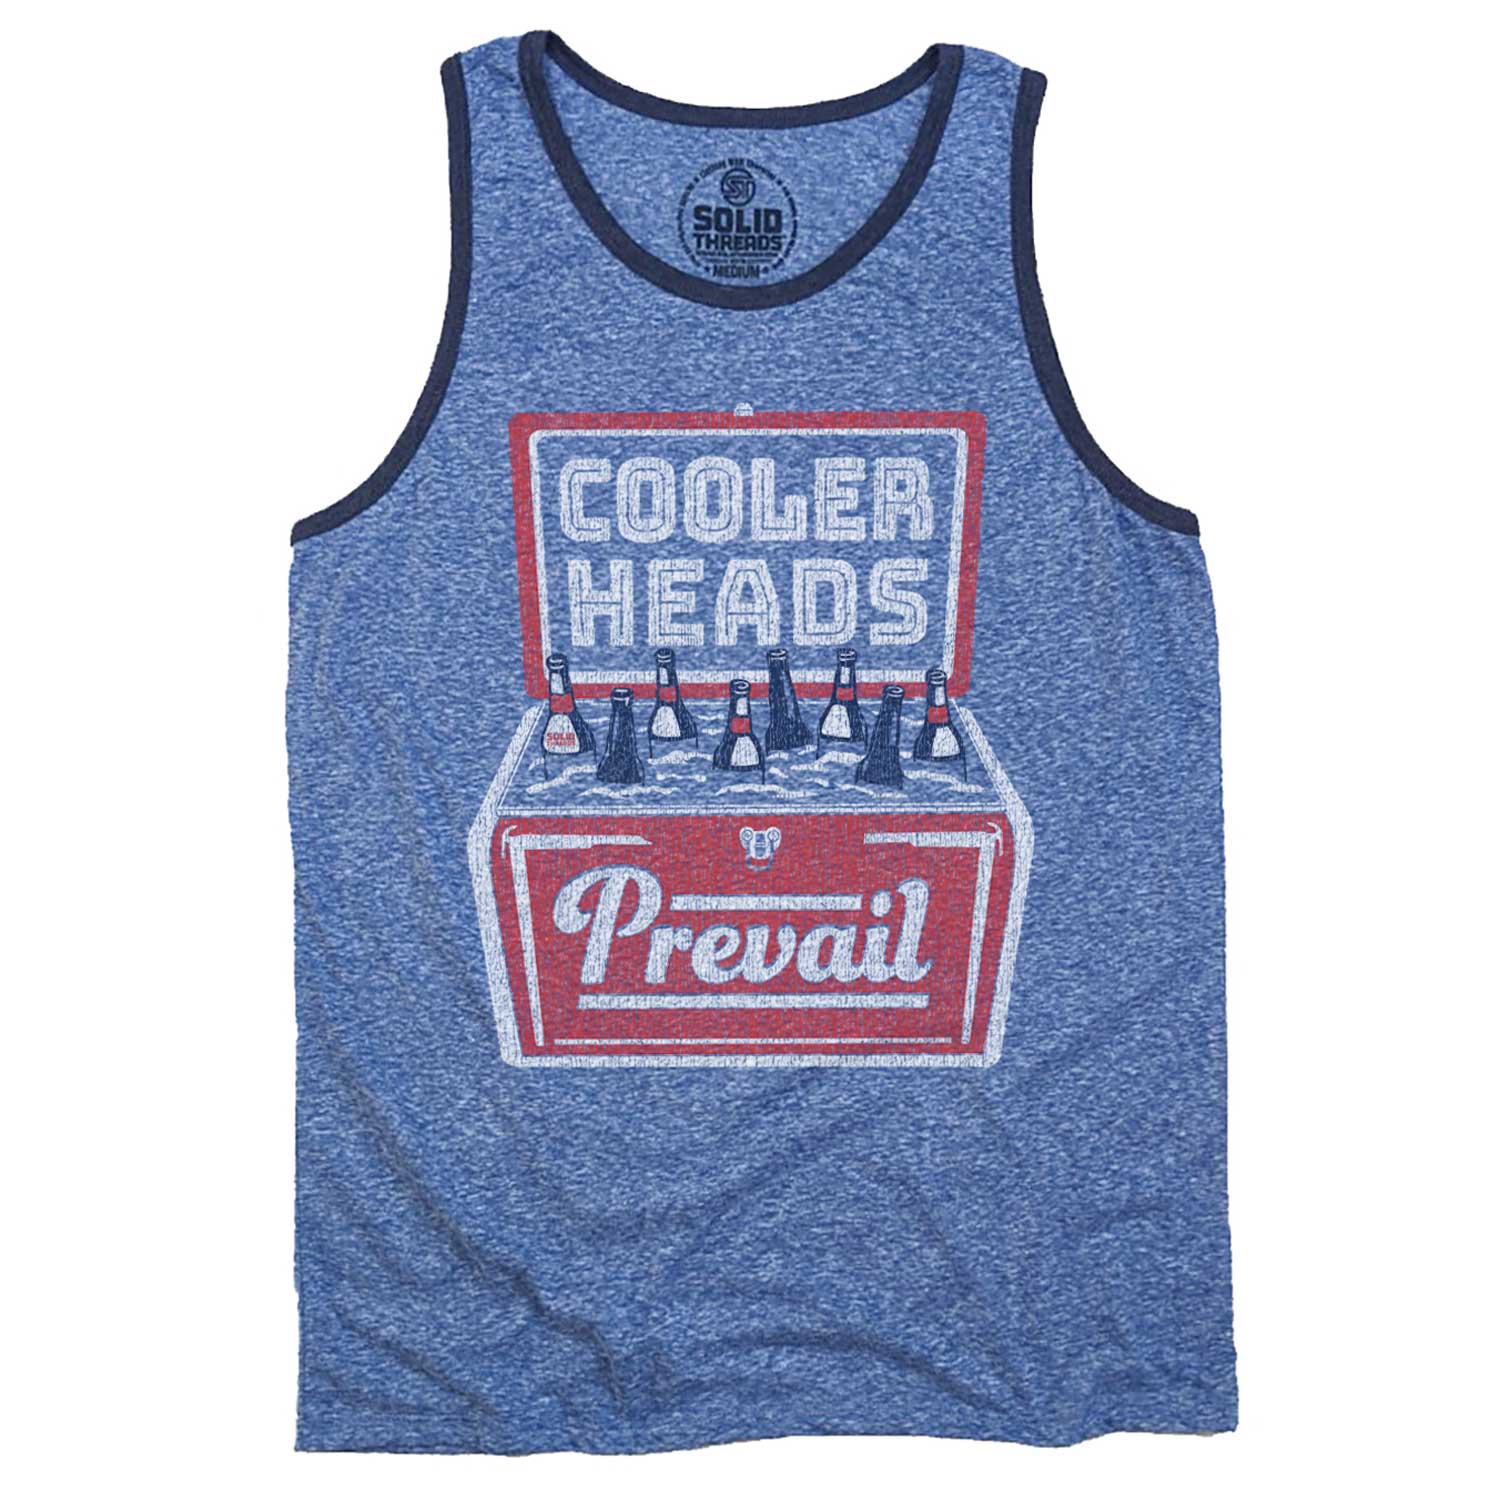 Men's Cooler Heads Vintage Graphic Tank Top | Funny Beer T-shirt | Solid Threads